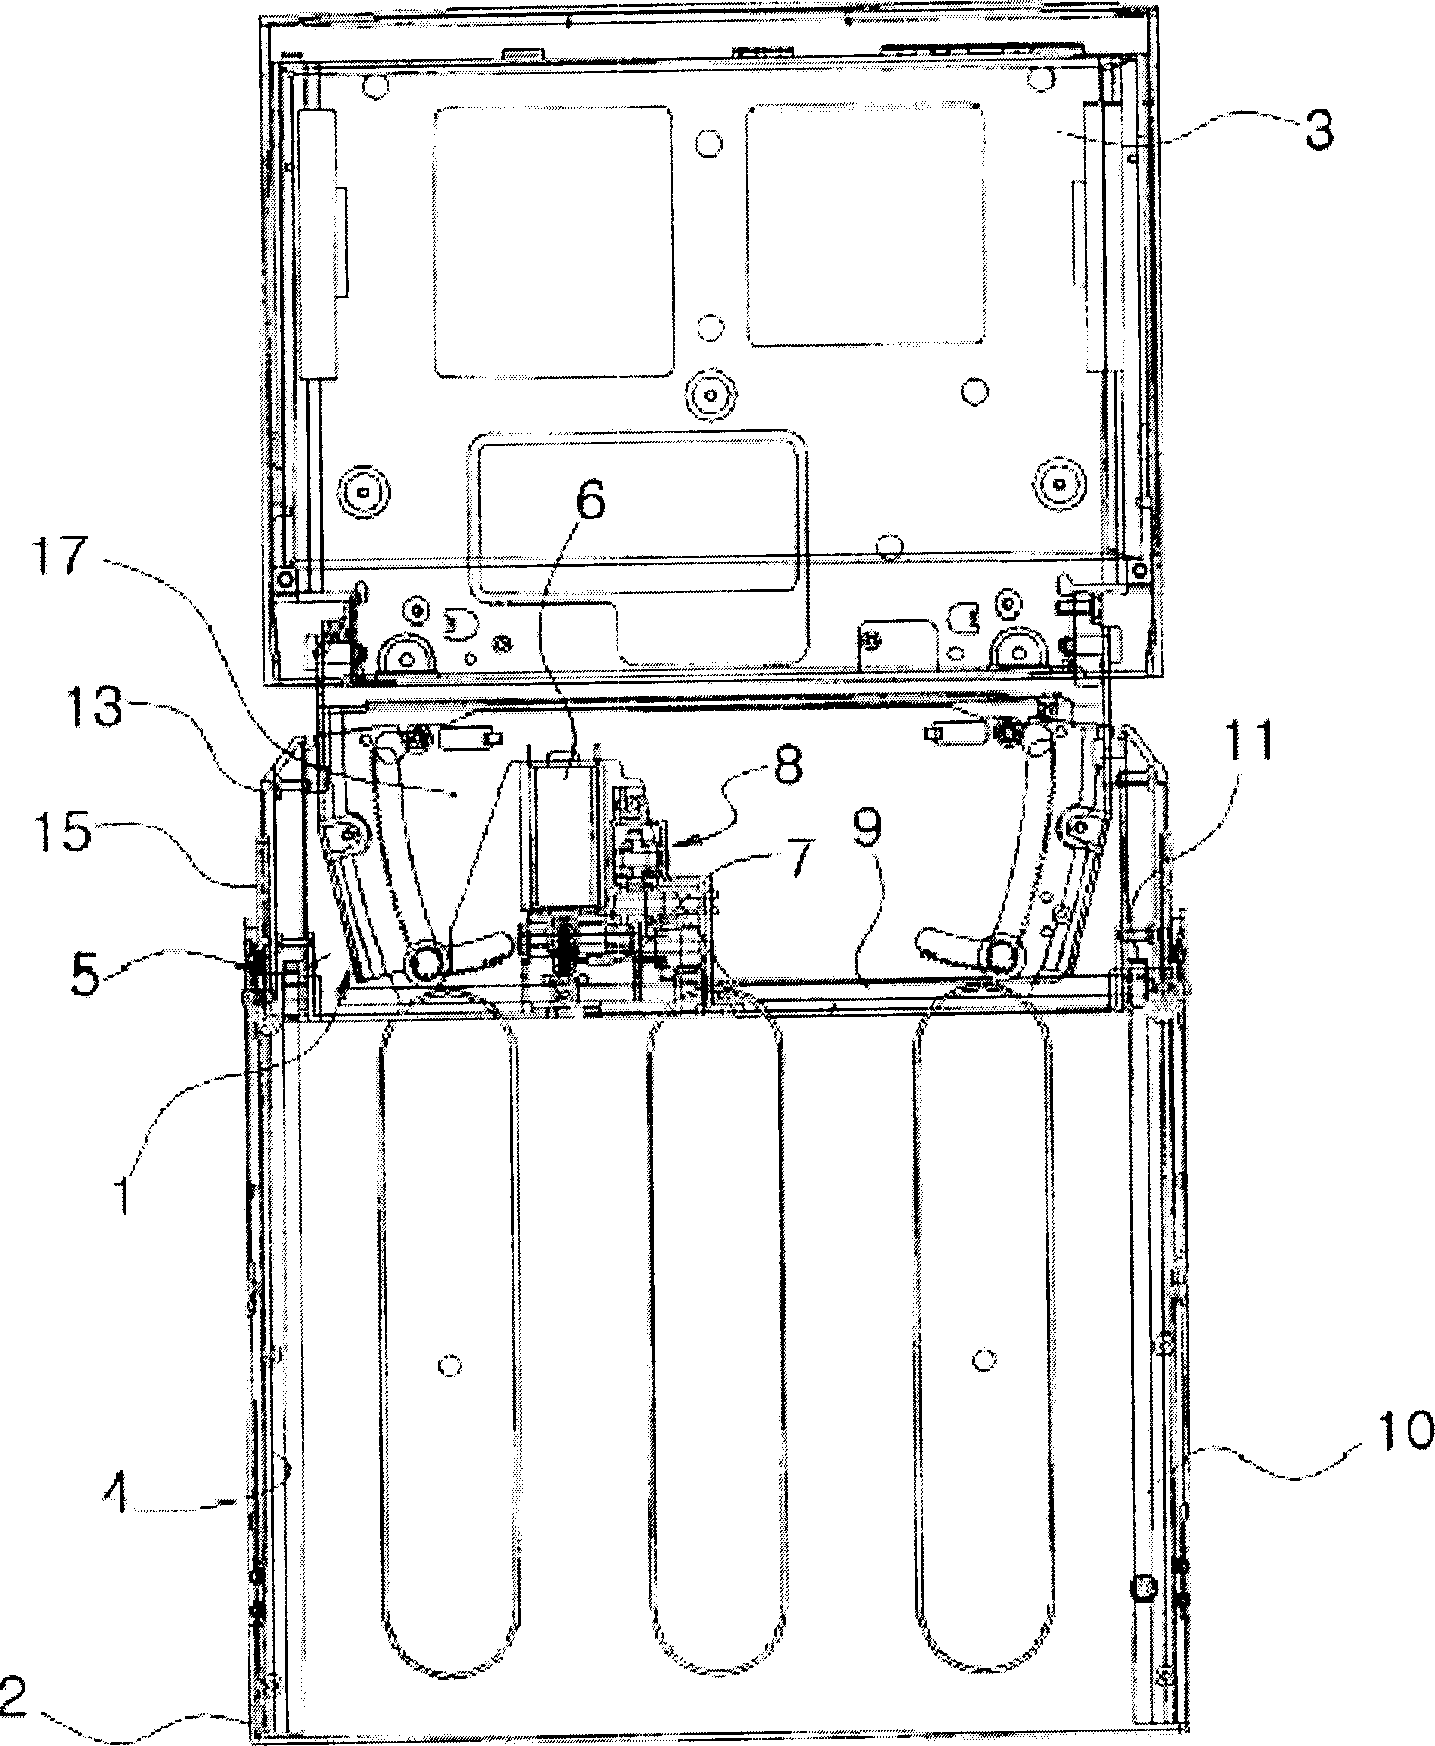 Apparatus for receiving monitor for vehicles